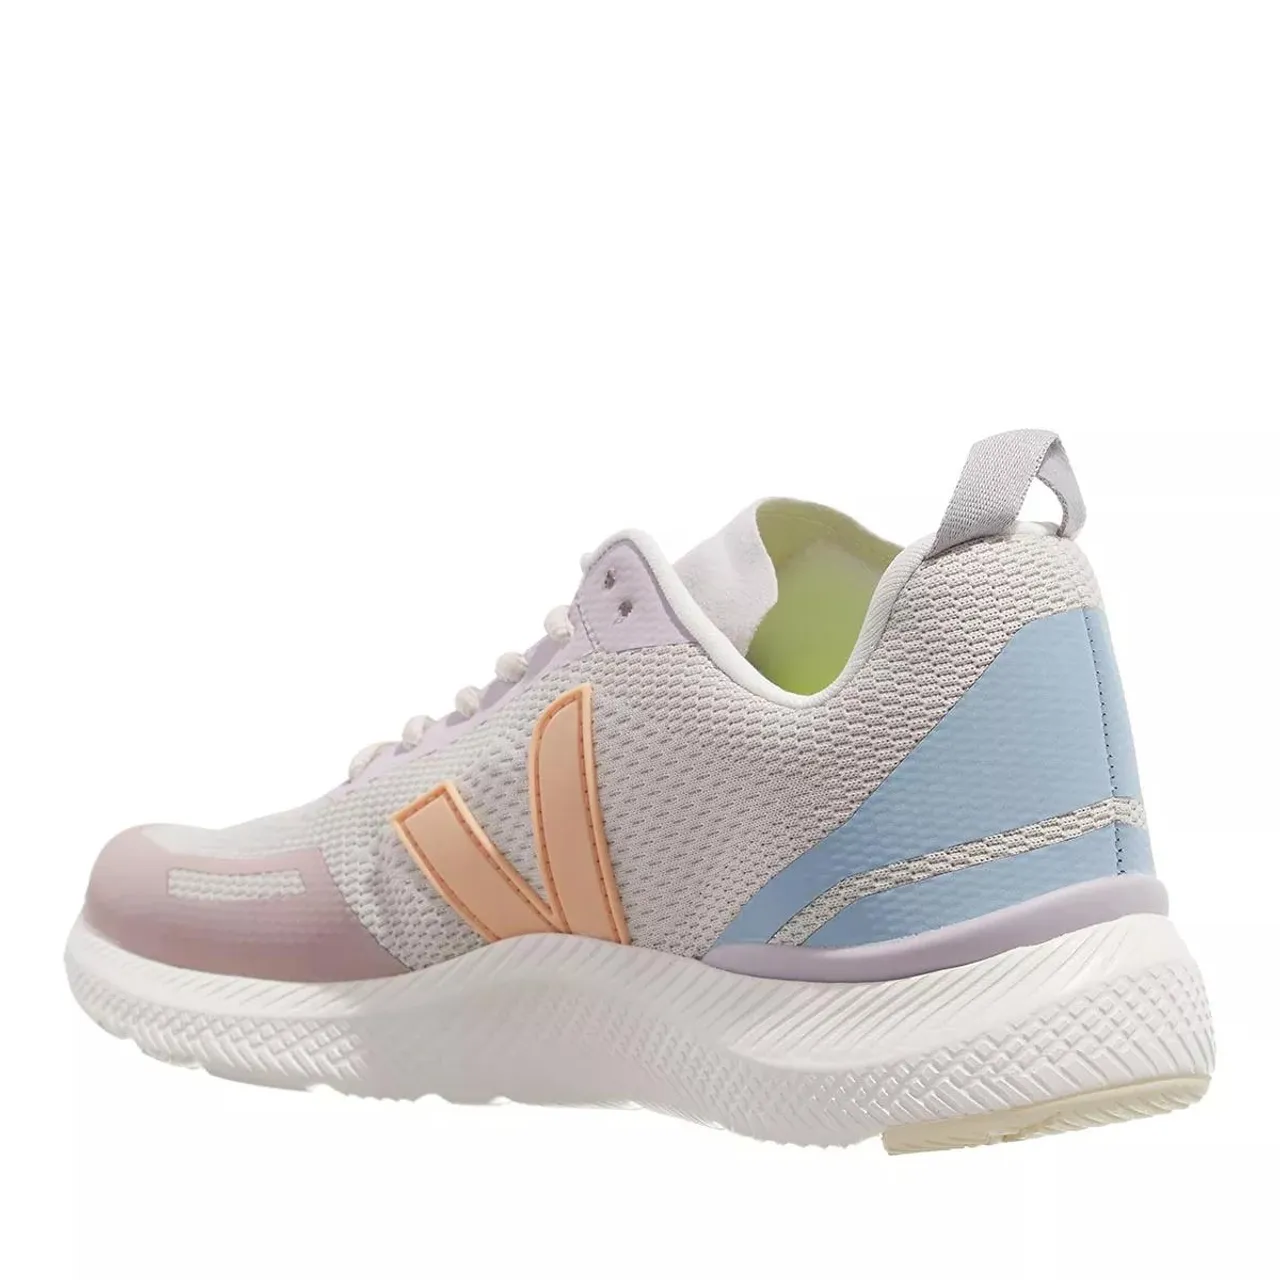 Veja Sneakers - Impala Eng-Mesh - colorful - Sneakers for ladies